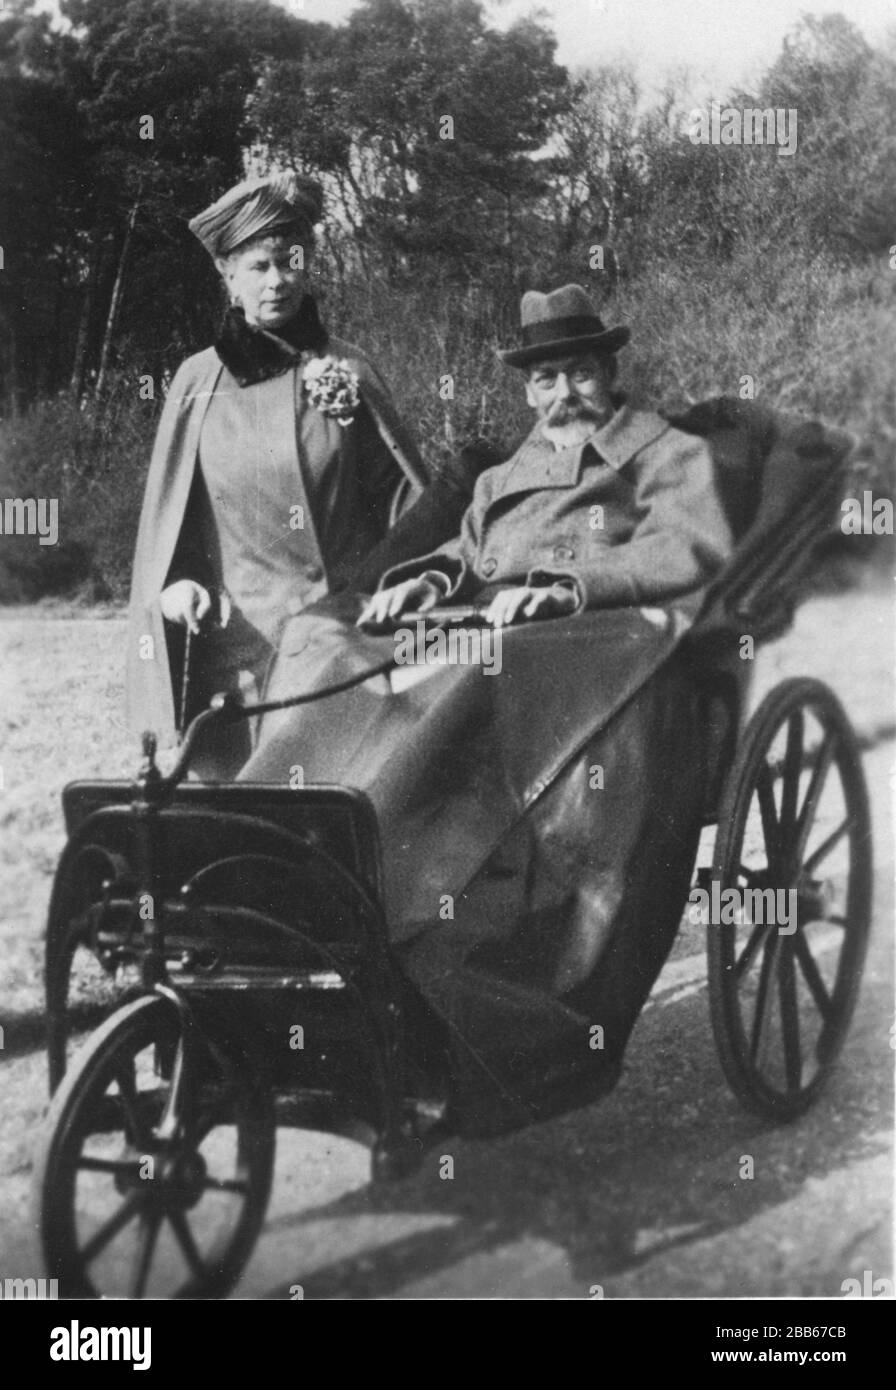 King George V  (1865-1936) with Queen Mary (Mary of Teck) (1867-1953), about 1929.  The King had developed chronic obstructive pulmonary disease by the mid-1920s. In this fine three-wheel wheelchair, he was resting a the seaside resort, Bognor. Text on this photo card says, "Kodak, Ltd will devote the whole of the profits derived from the sales of these postcards to King Edward's Hospital Fund for London."   To see my Royals-related vintage images, Search:  Prestor  vintage  Royal  vehicle Stock Photo